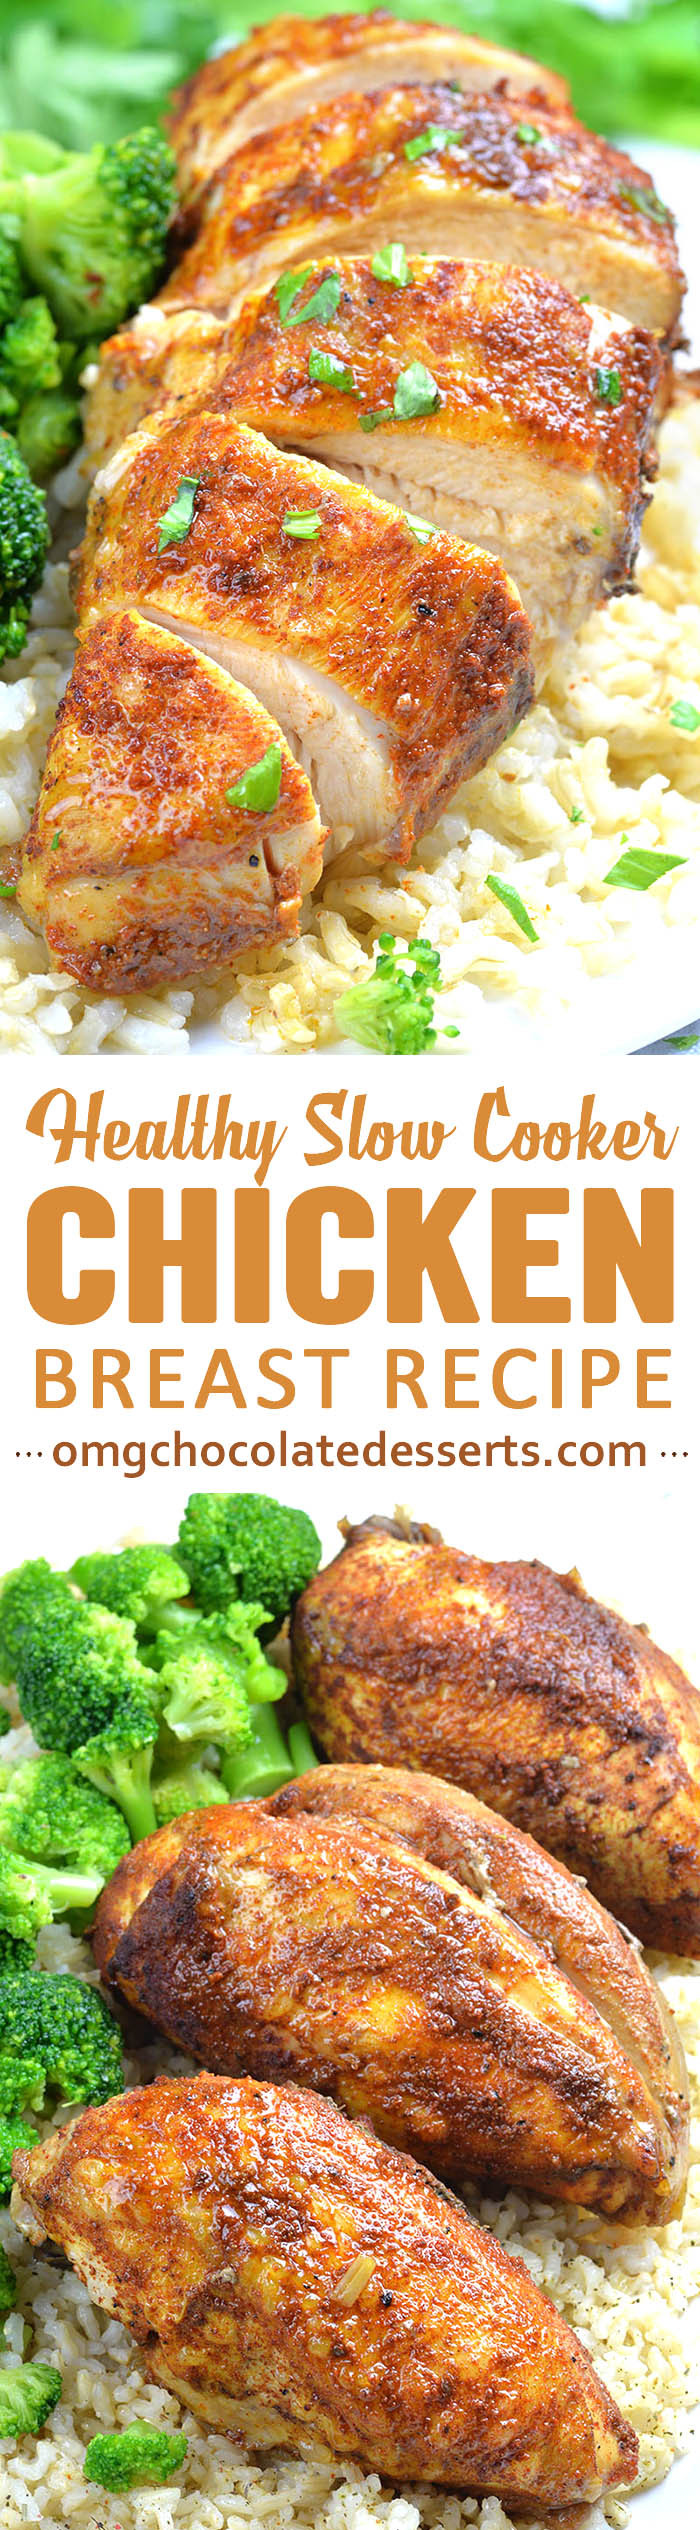 Slow Cooker Healthy Chicken Breast Recipes
 Healthy Slow Cooker Chicken Breast Recipe OMG Chocolate